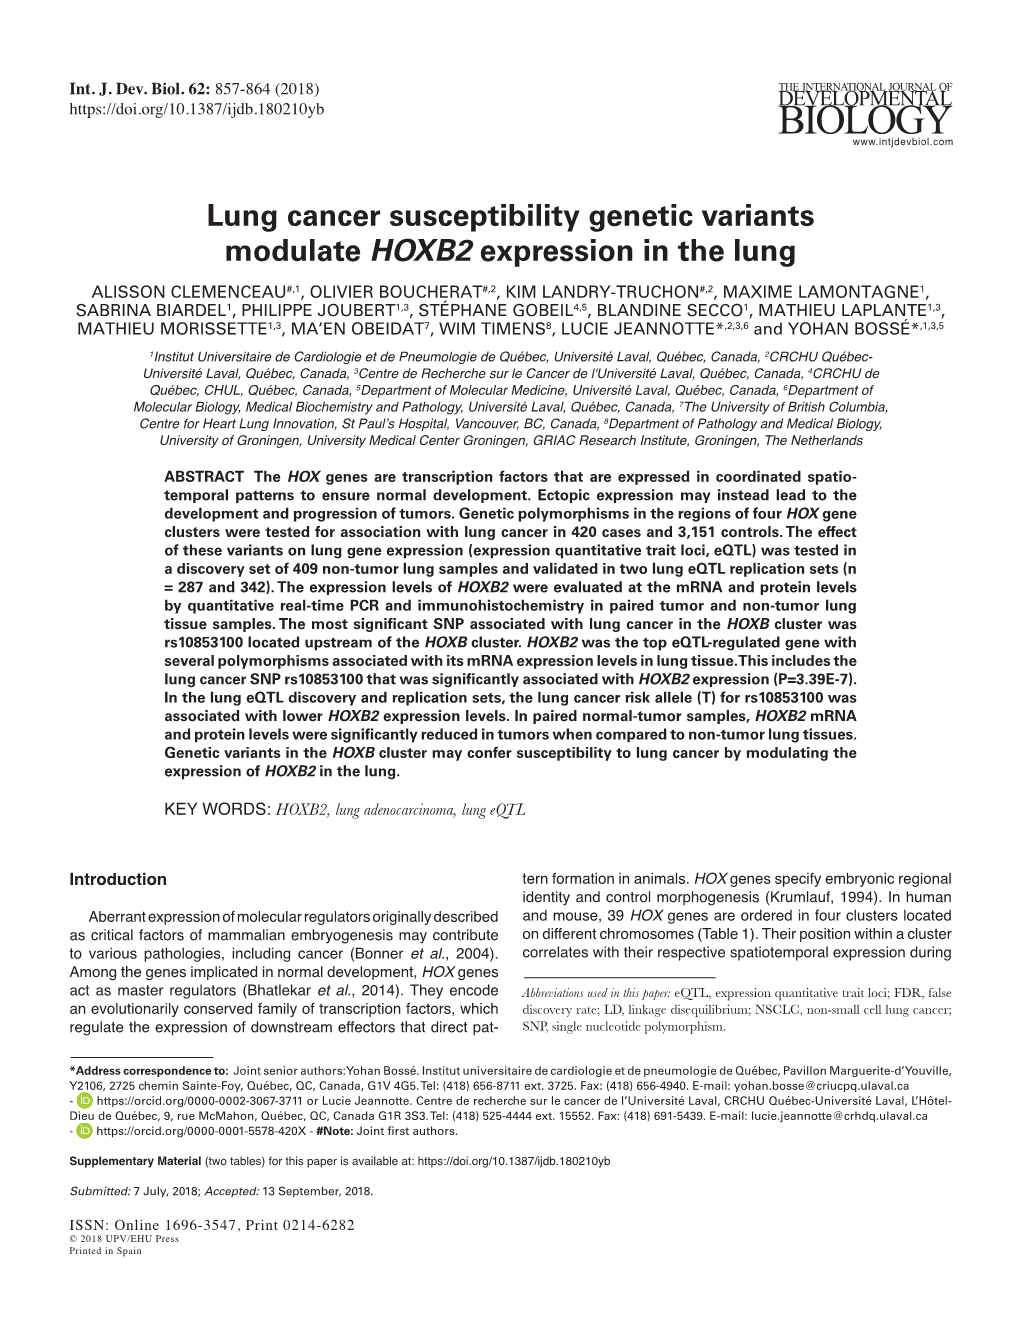 Lung Cancer Susceptibility Genetic Variants Modulate HOXB2